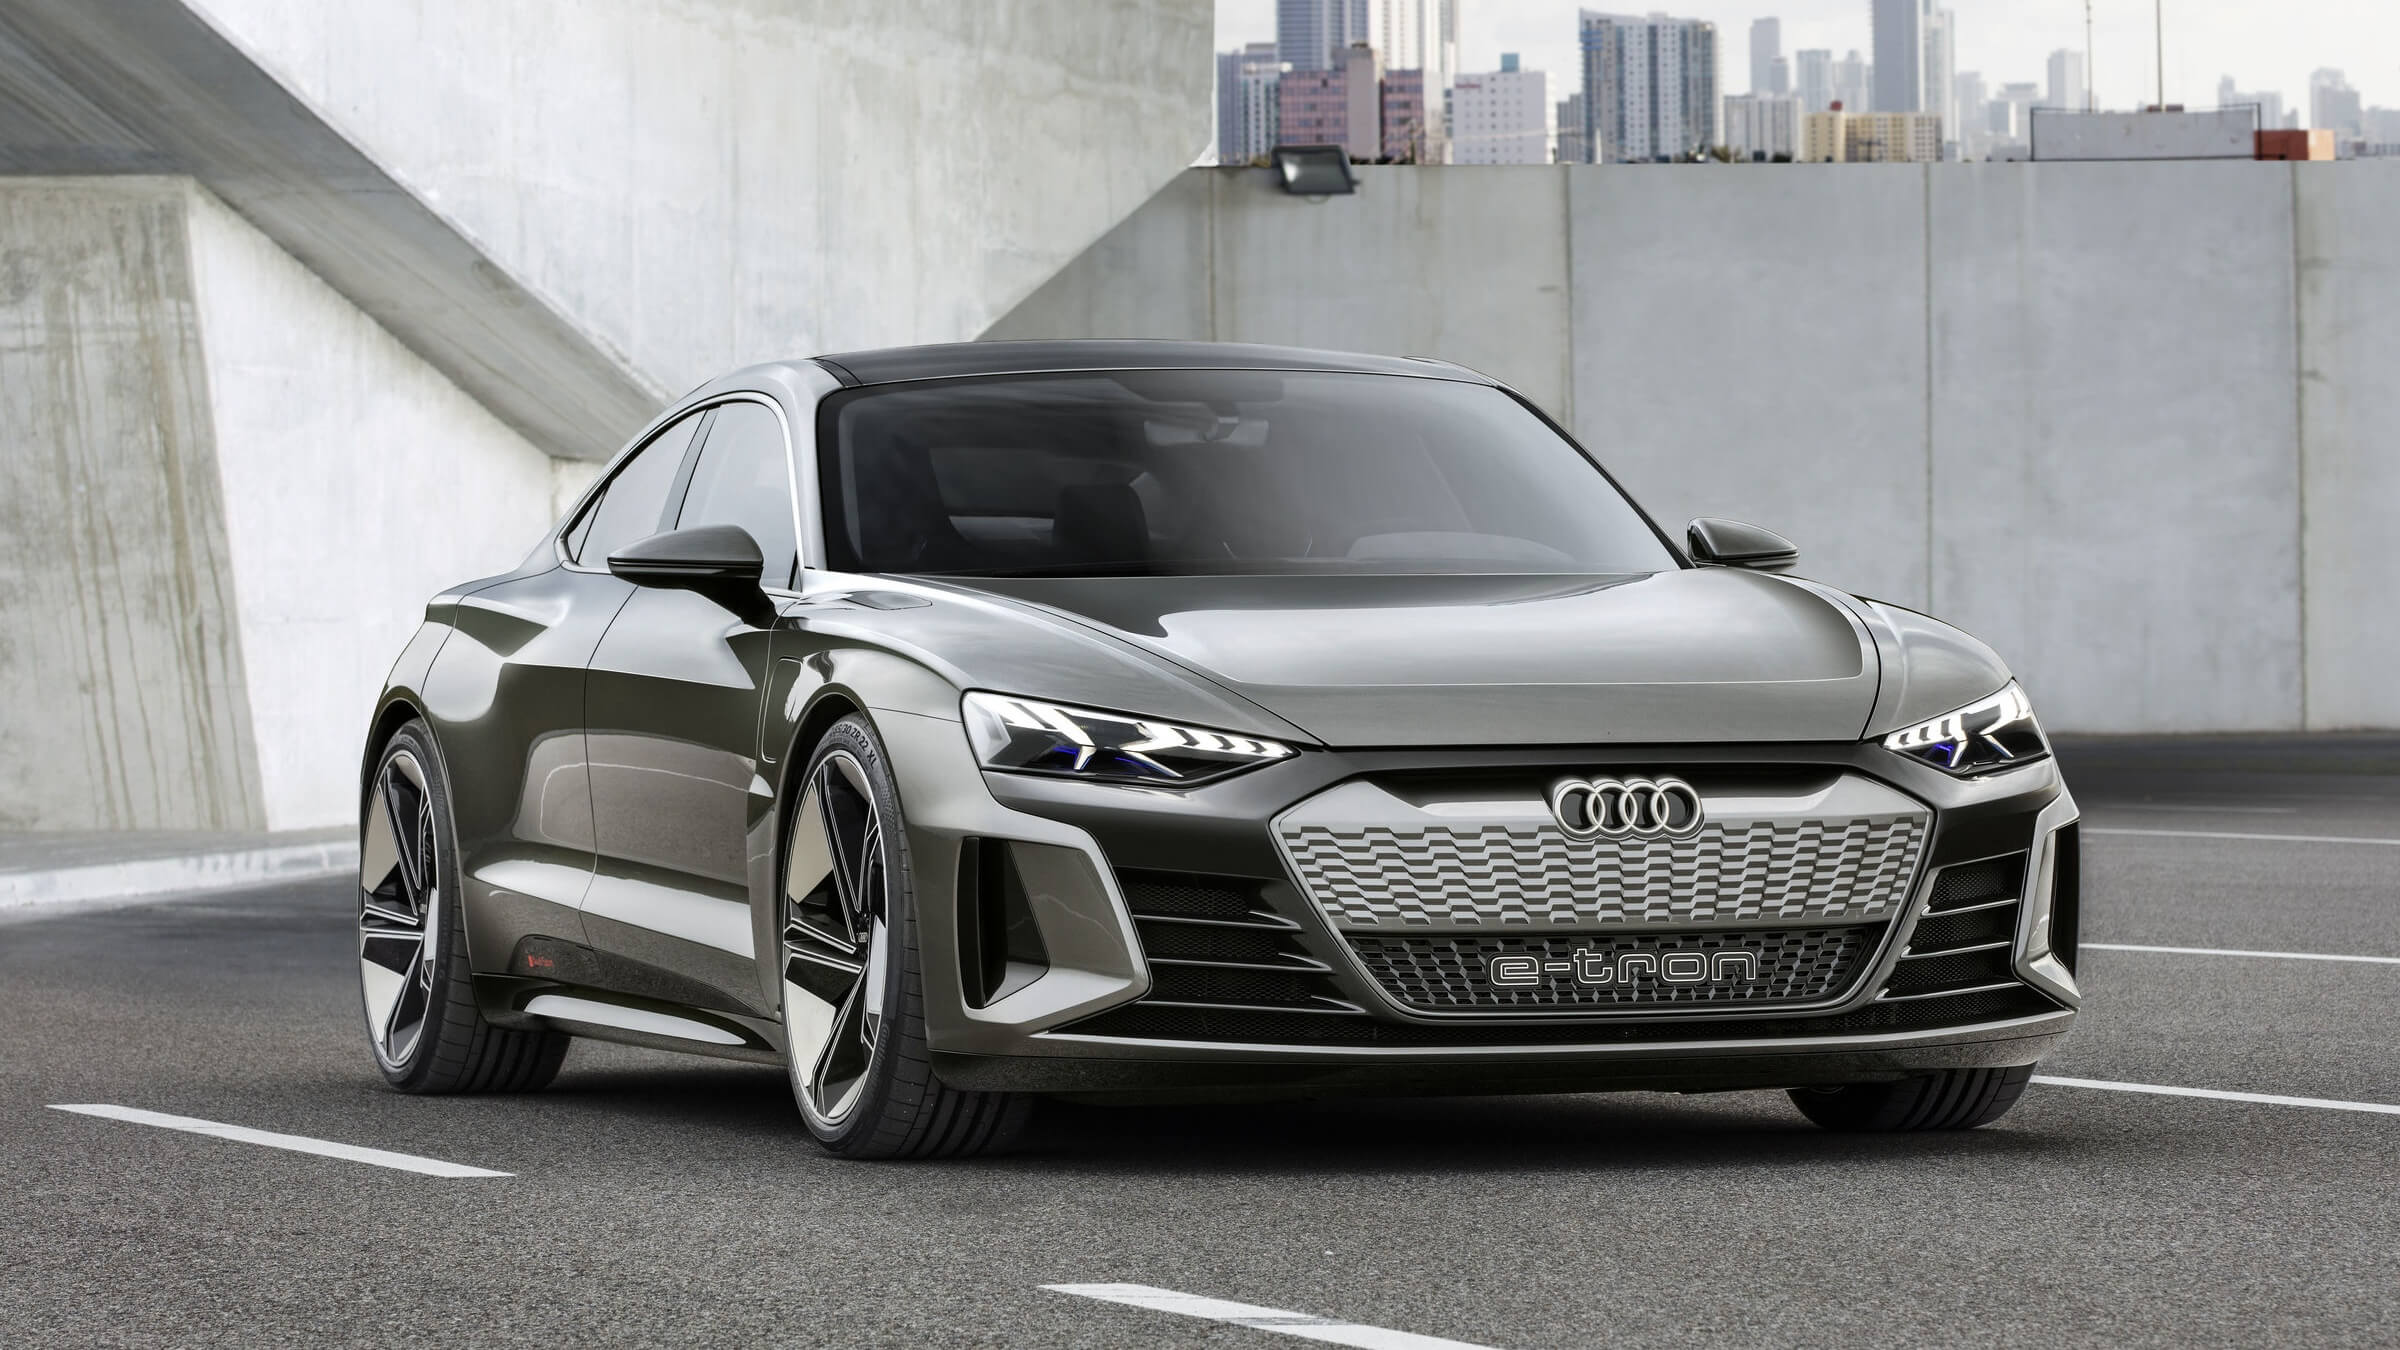 Audi Is Taking On Tesla With the Vegan and Recycled Electric e-tron GT